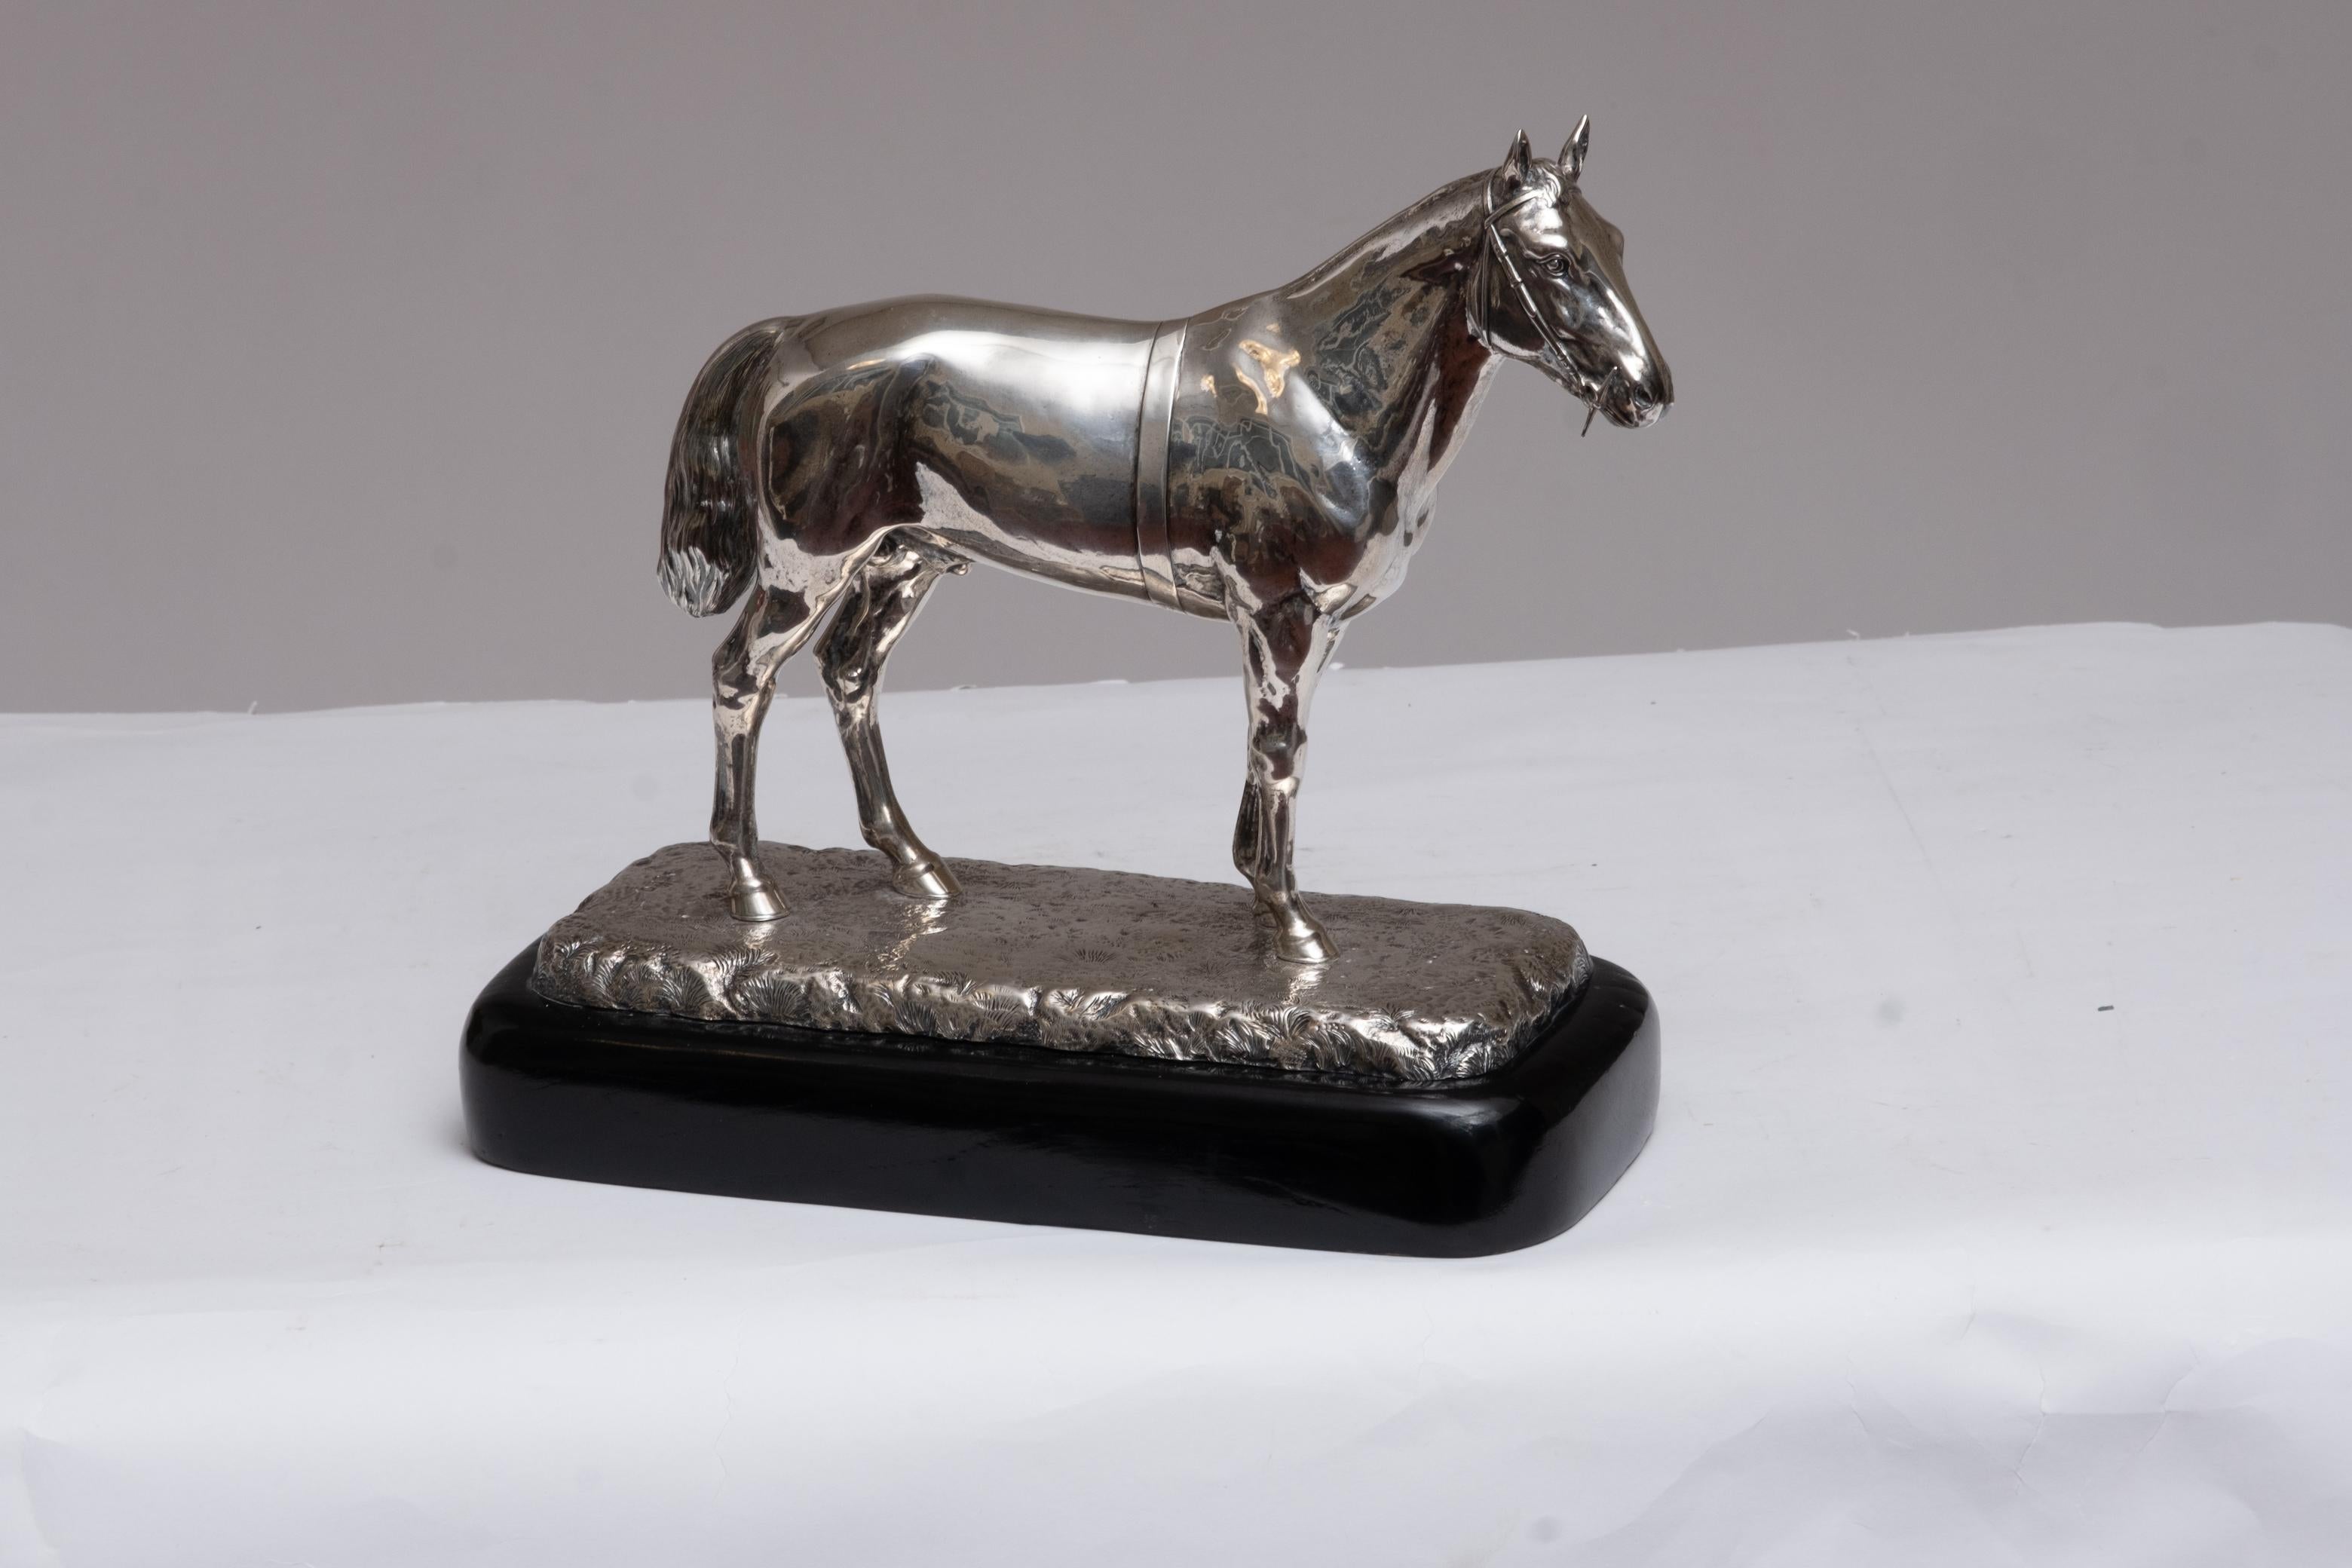 Antique English Sterling Silver Equestrian Sculpture dated 1907 multiple markings including London and maker impressed markings Sterling Silver on Wood Plinth, 1907. Marked “GC”. with London marking
